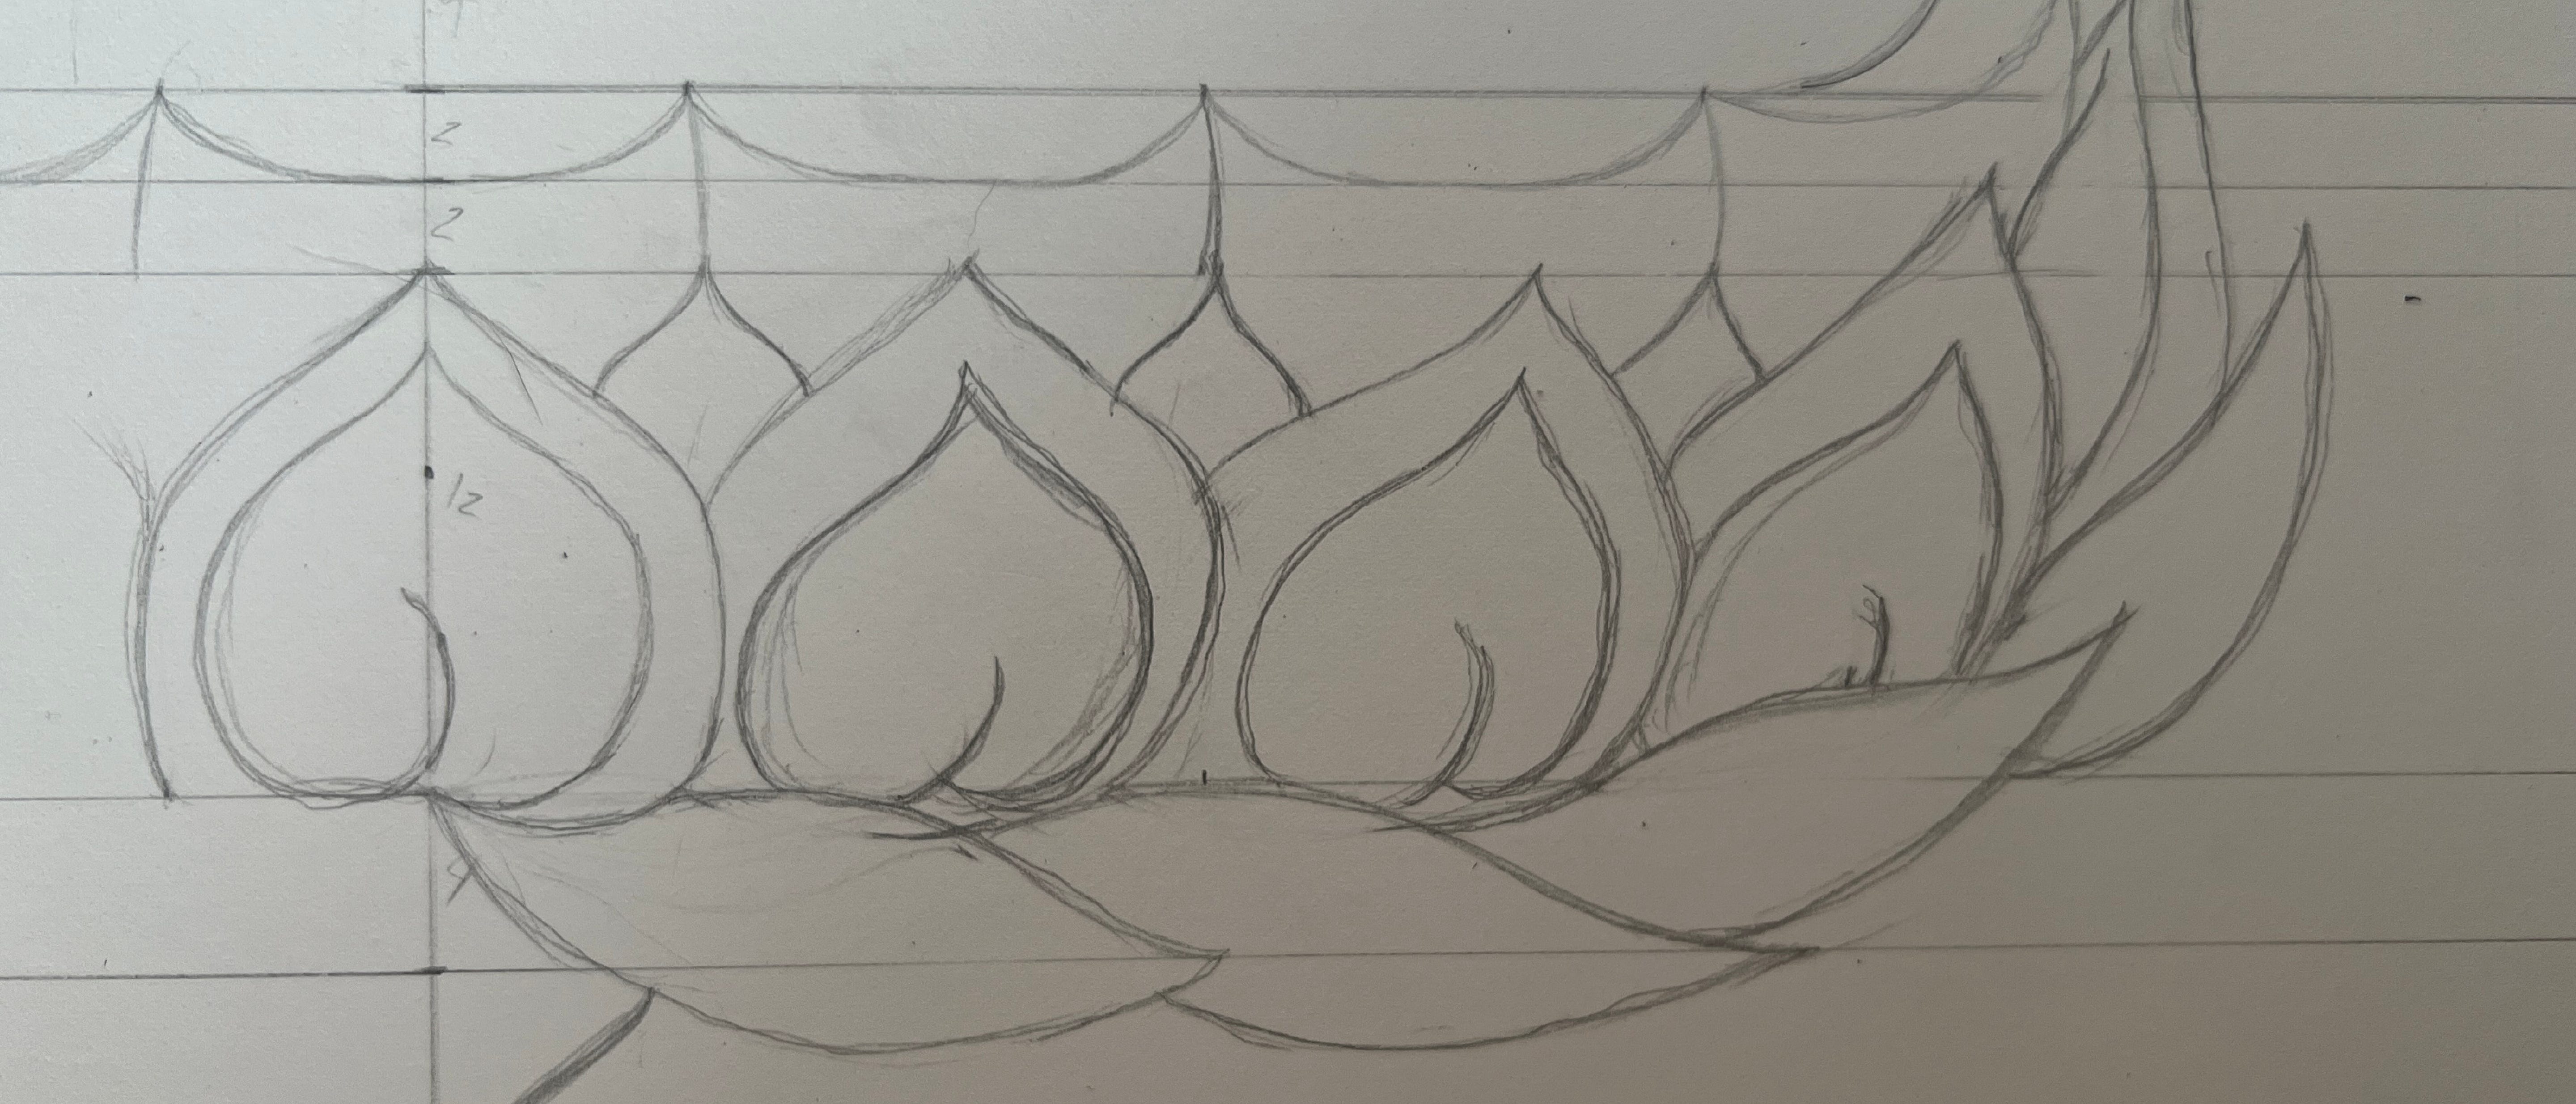 Super close up photo of a pencil sketch of half a lotus throne on greyish paper. 